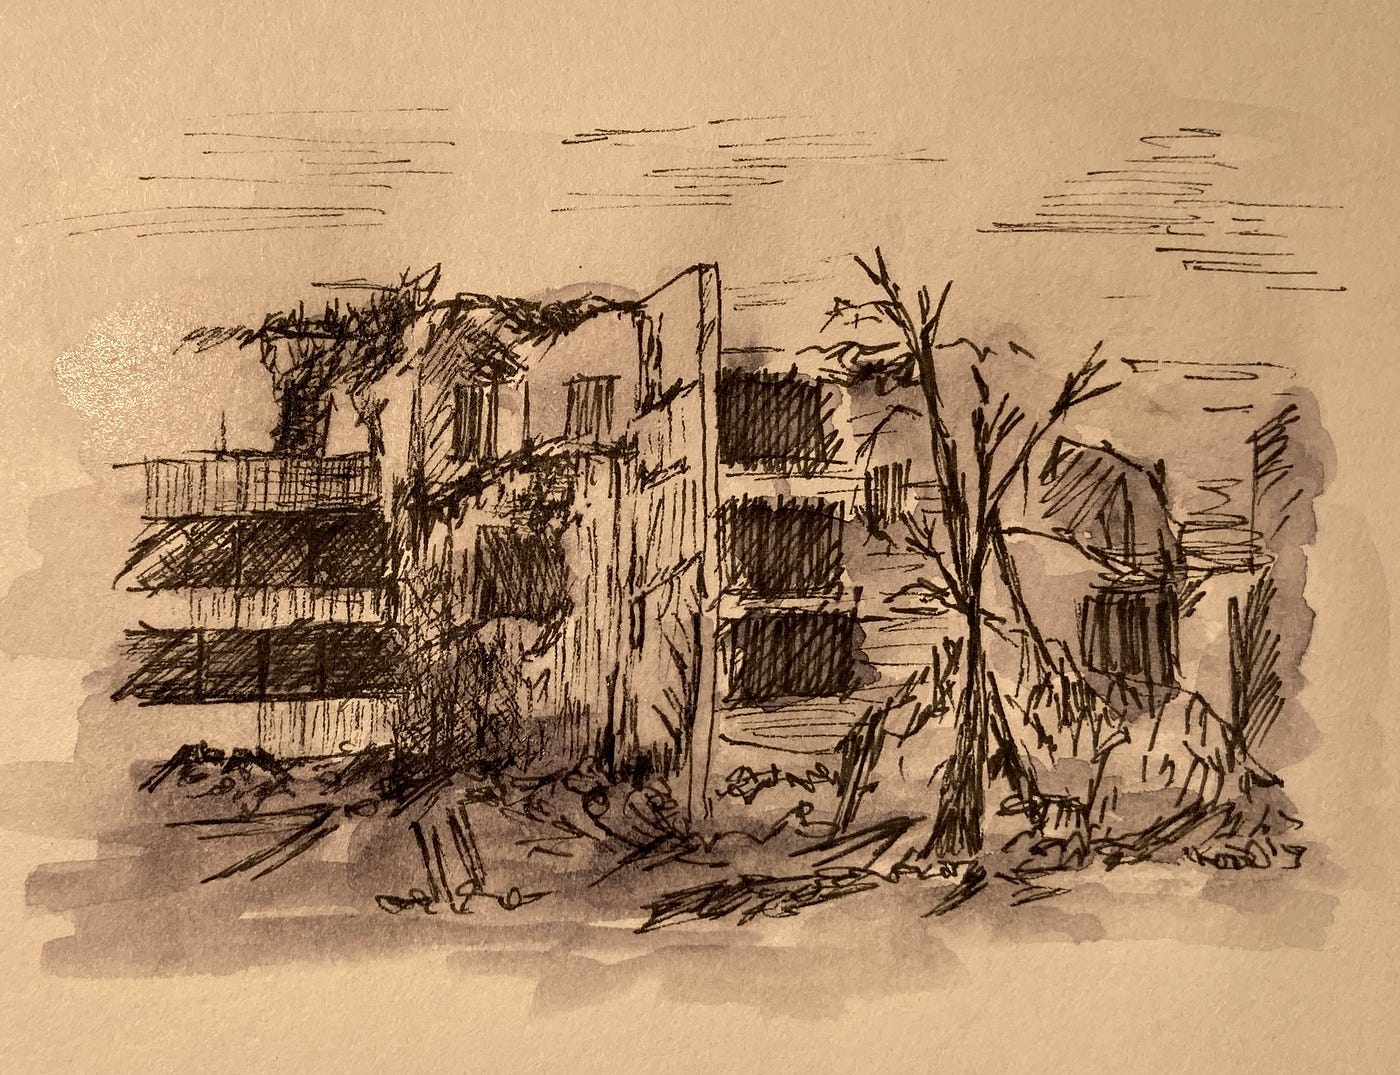 Sketch of bombed out apartment building and dead tree in Ukraine